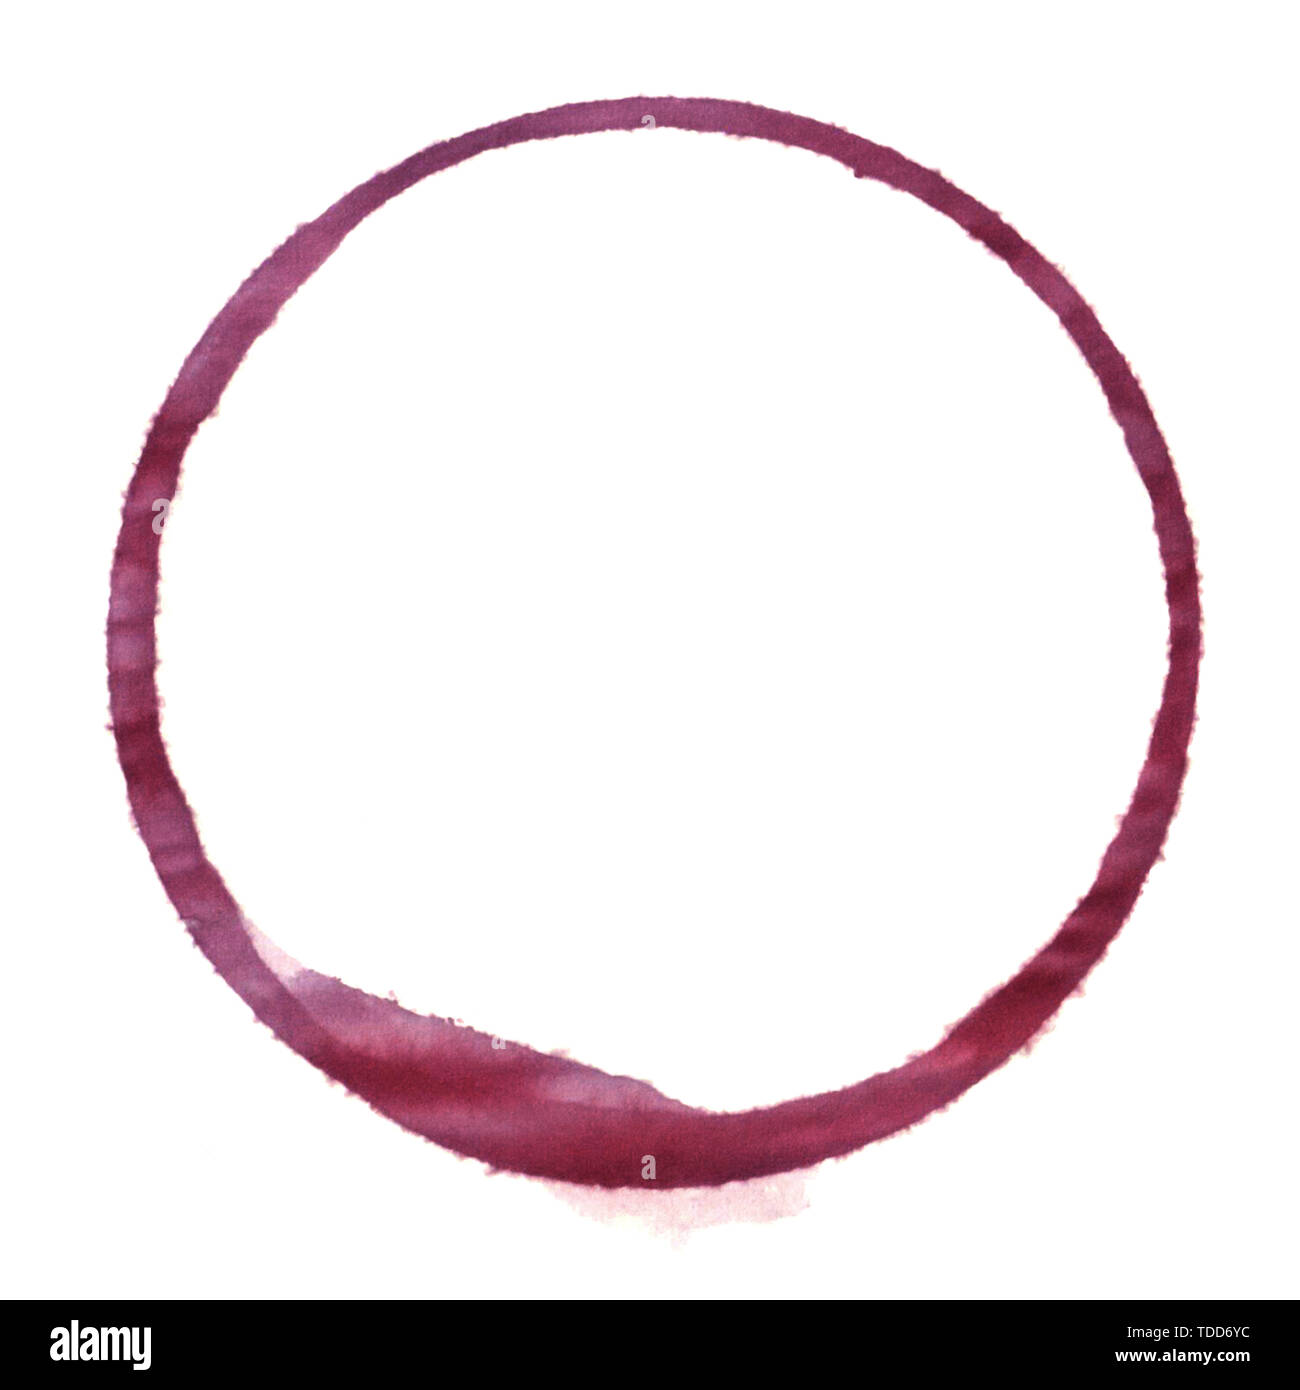 Red wine stain ring trace from a glass of wine Stock Photo